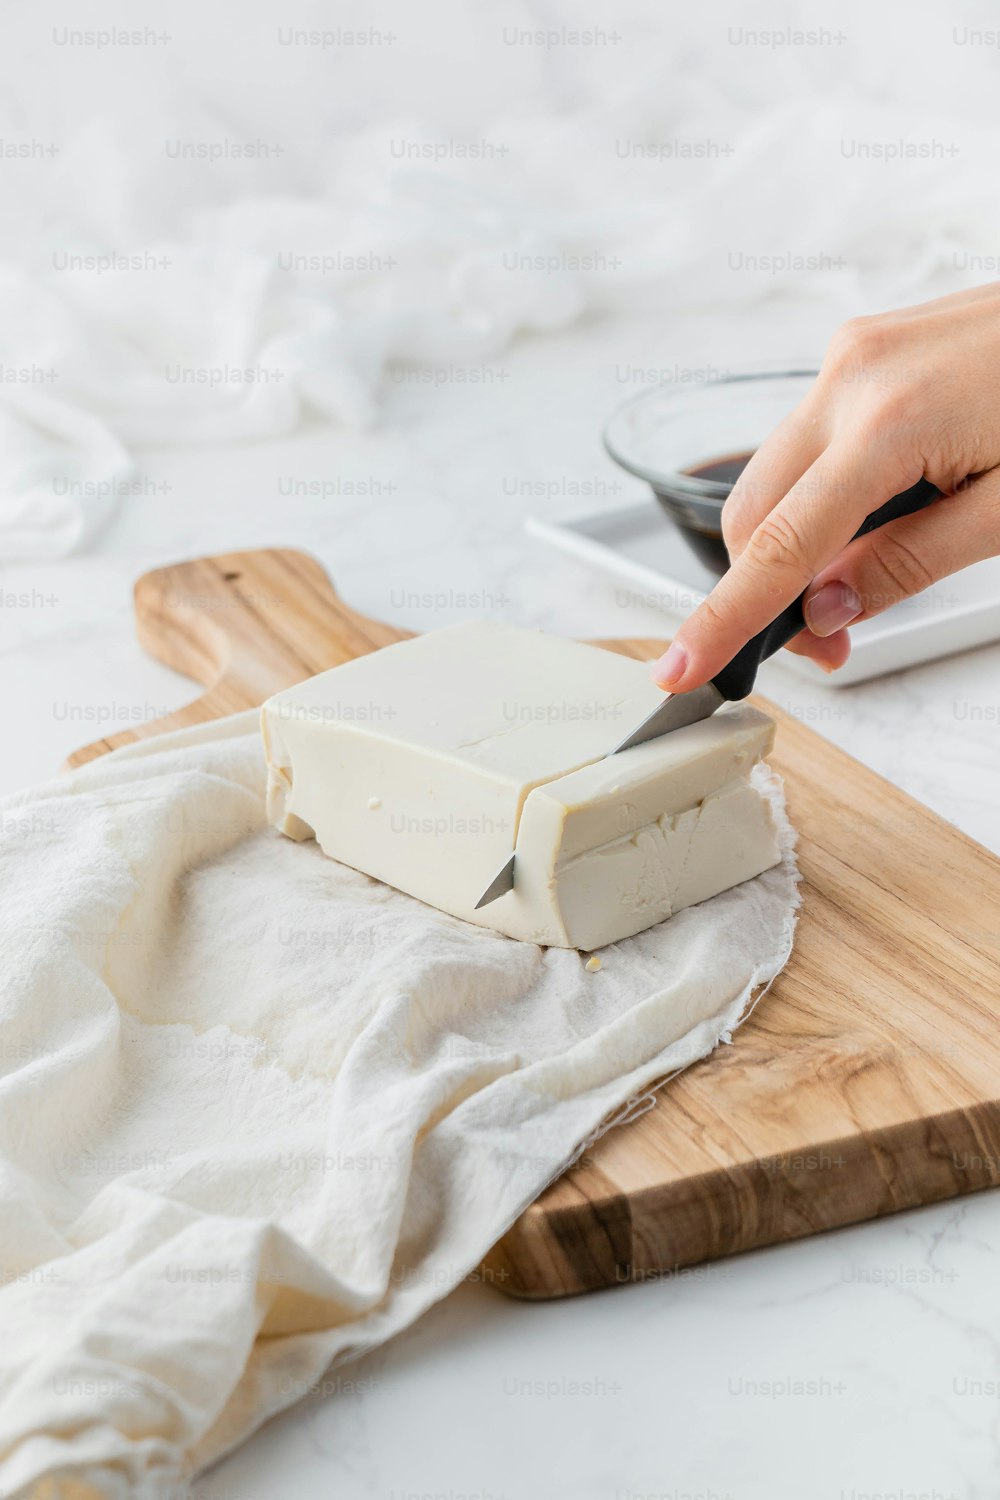 a person cutting a block of cheese on a cutting board